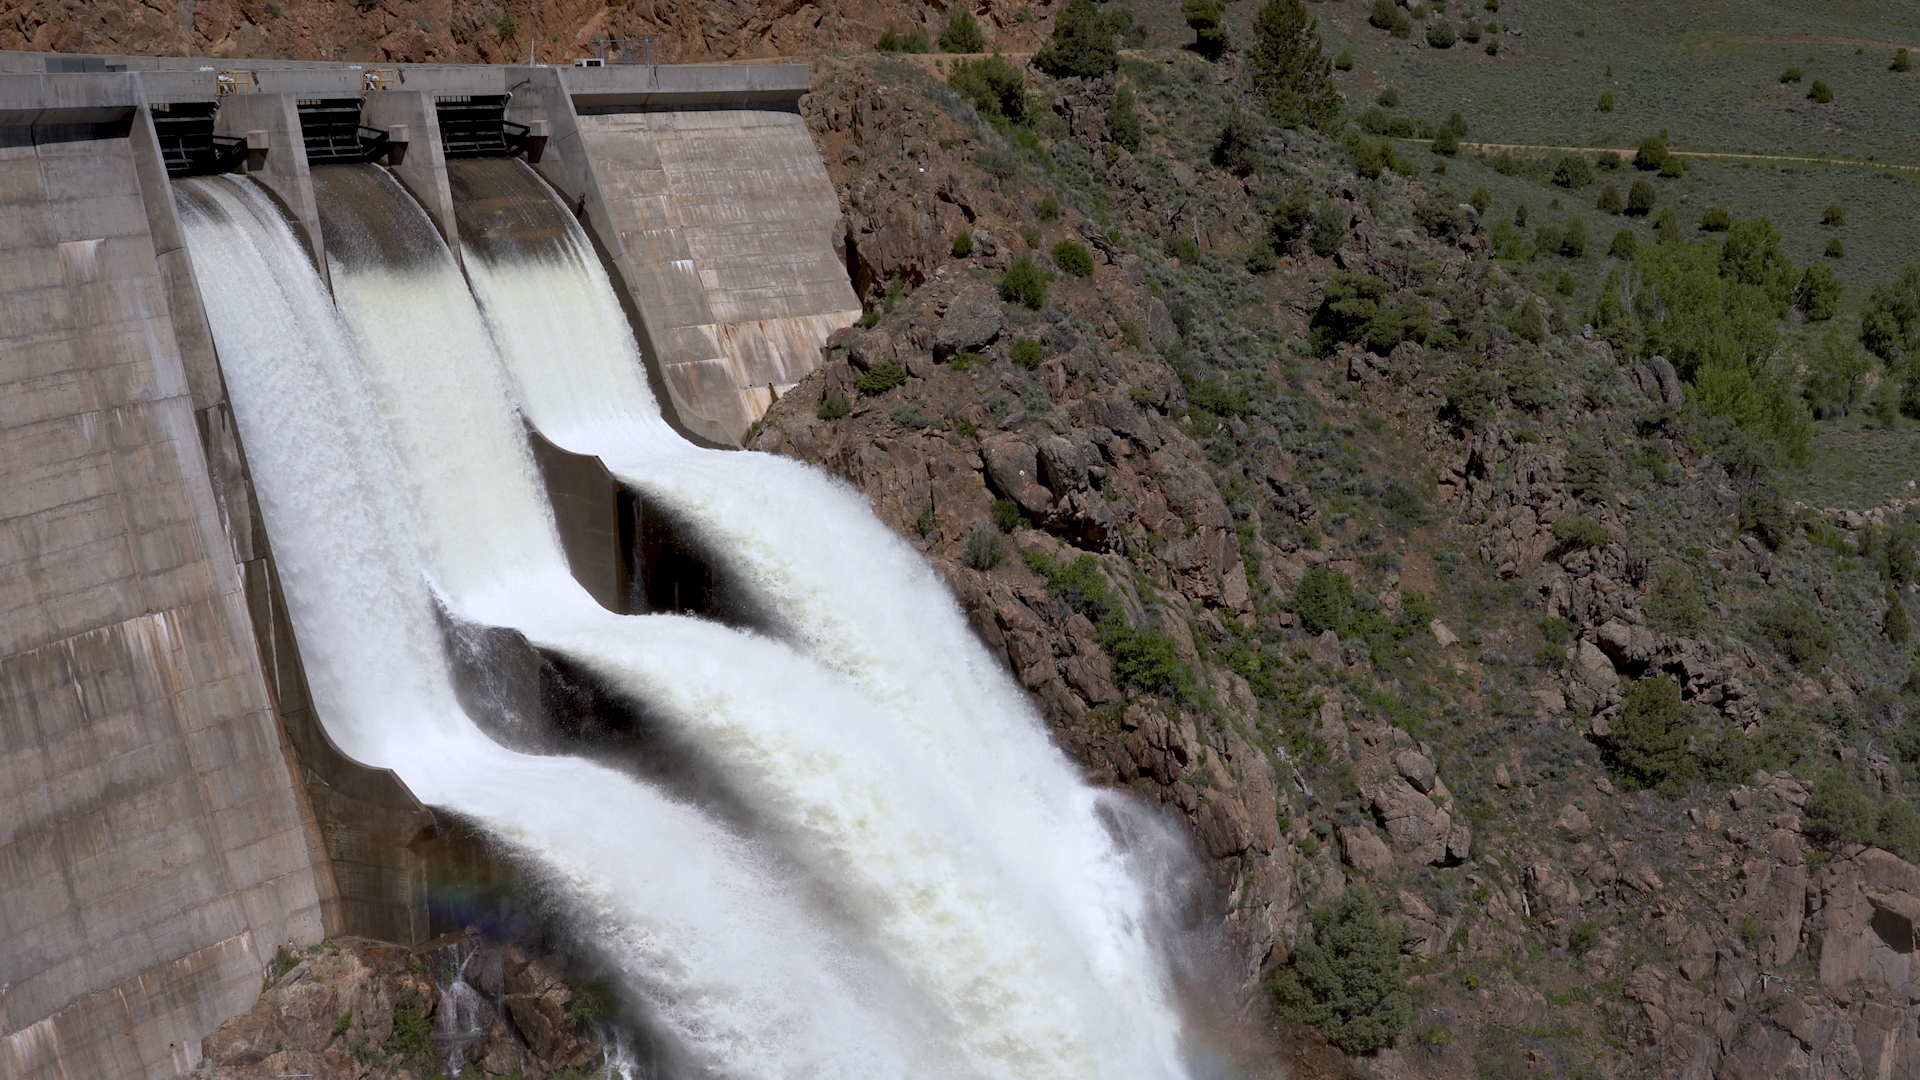 This picture shows water flowing down the dam at Williams Fork Dam.